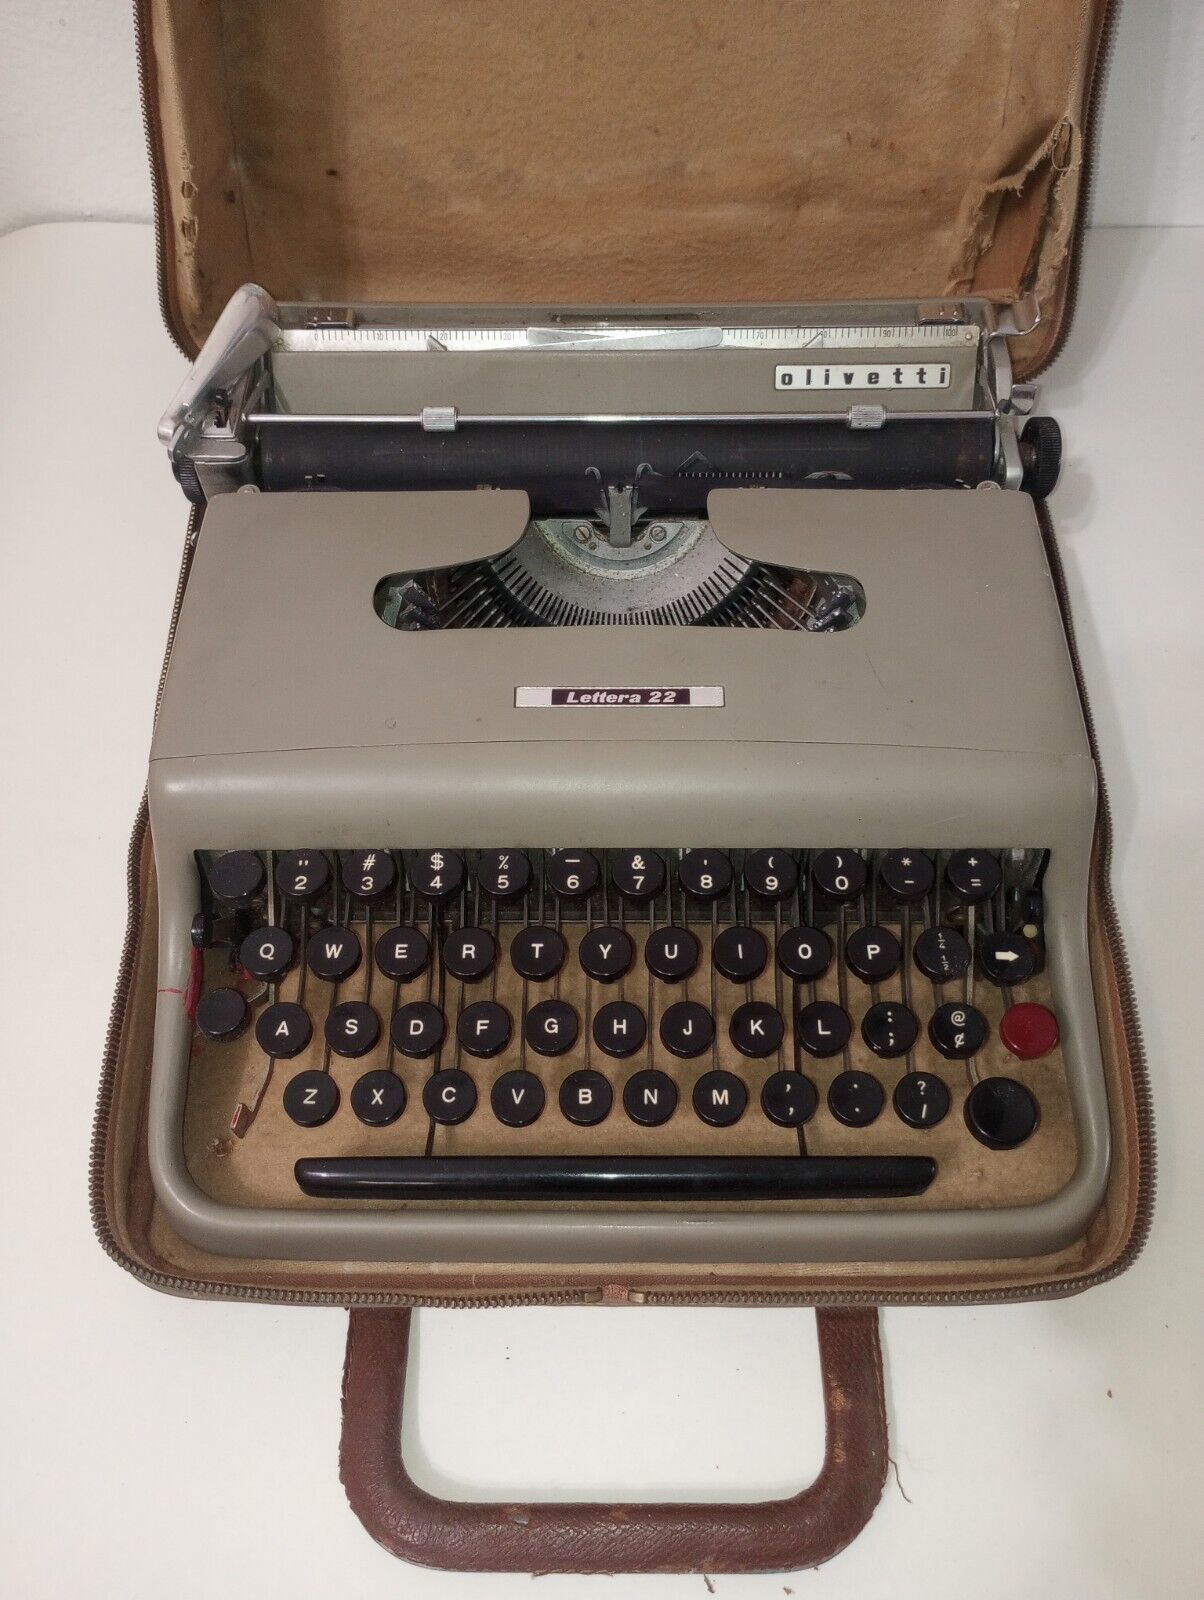 OLIVETTI LETTERA 22 TYPEWRITER . MADE BY IVREA IN ITALY 1950s. ORIGINAL CASE.